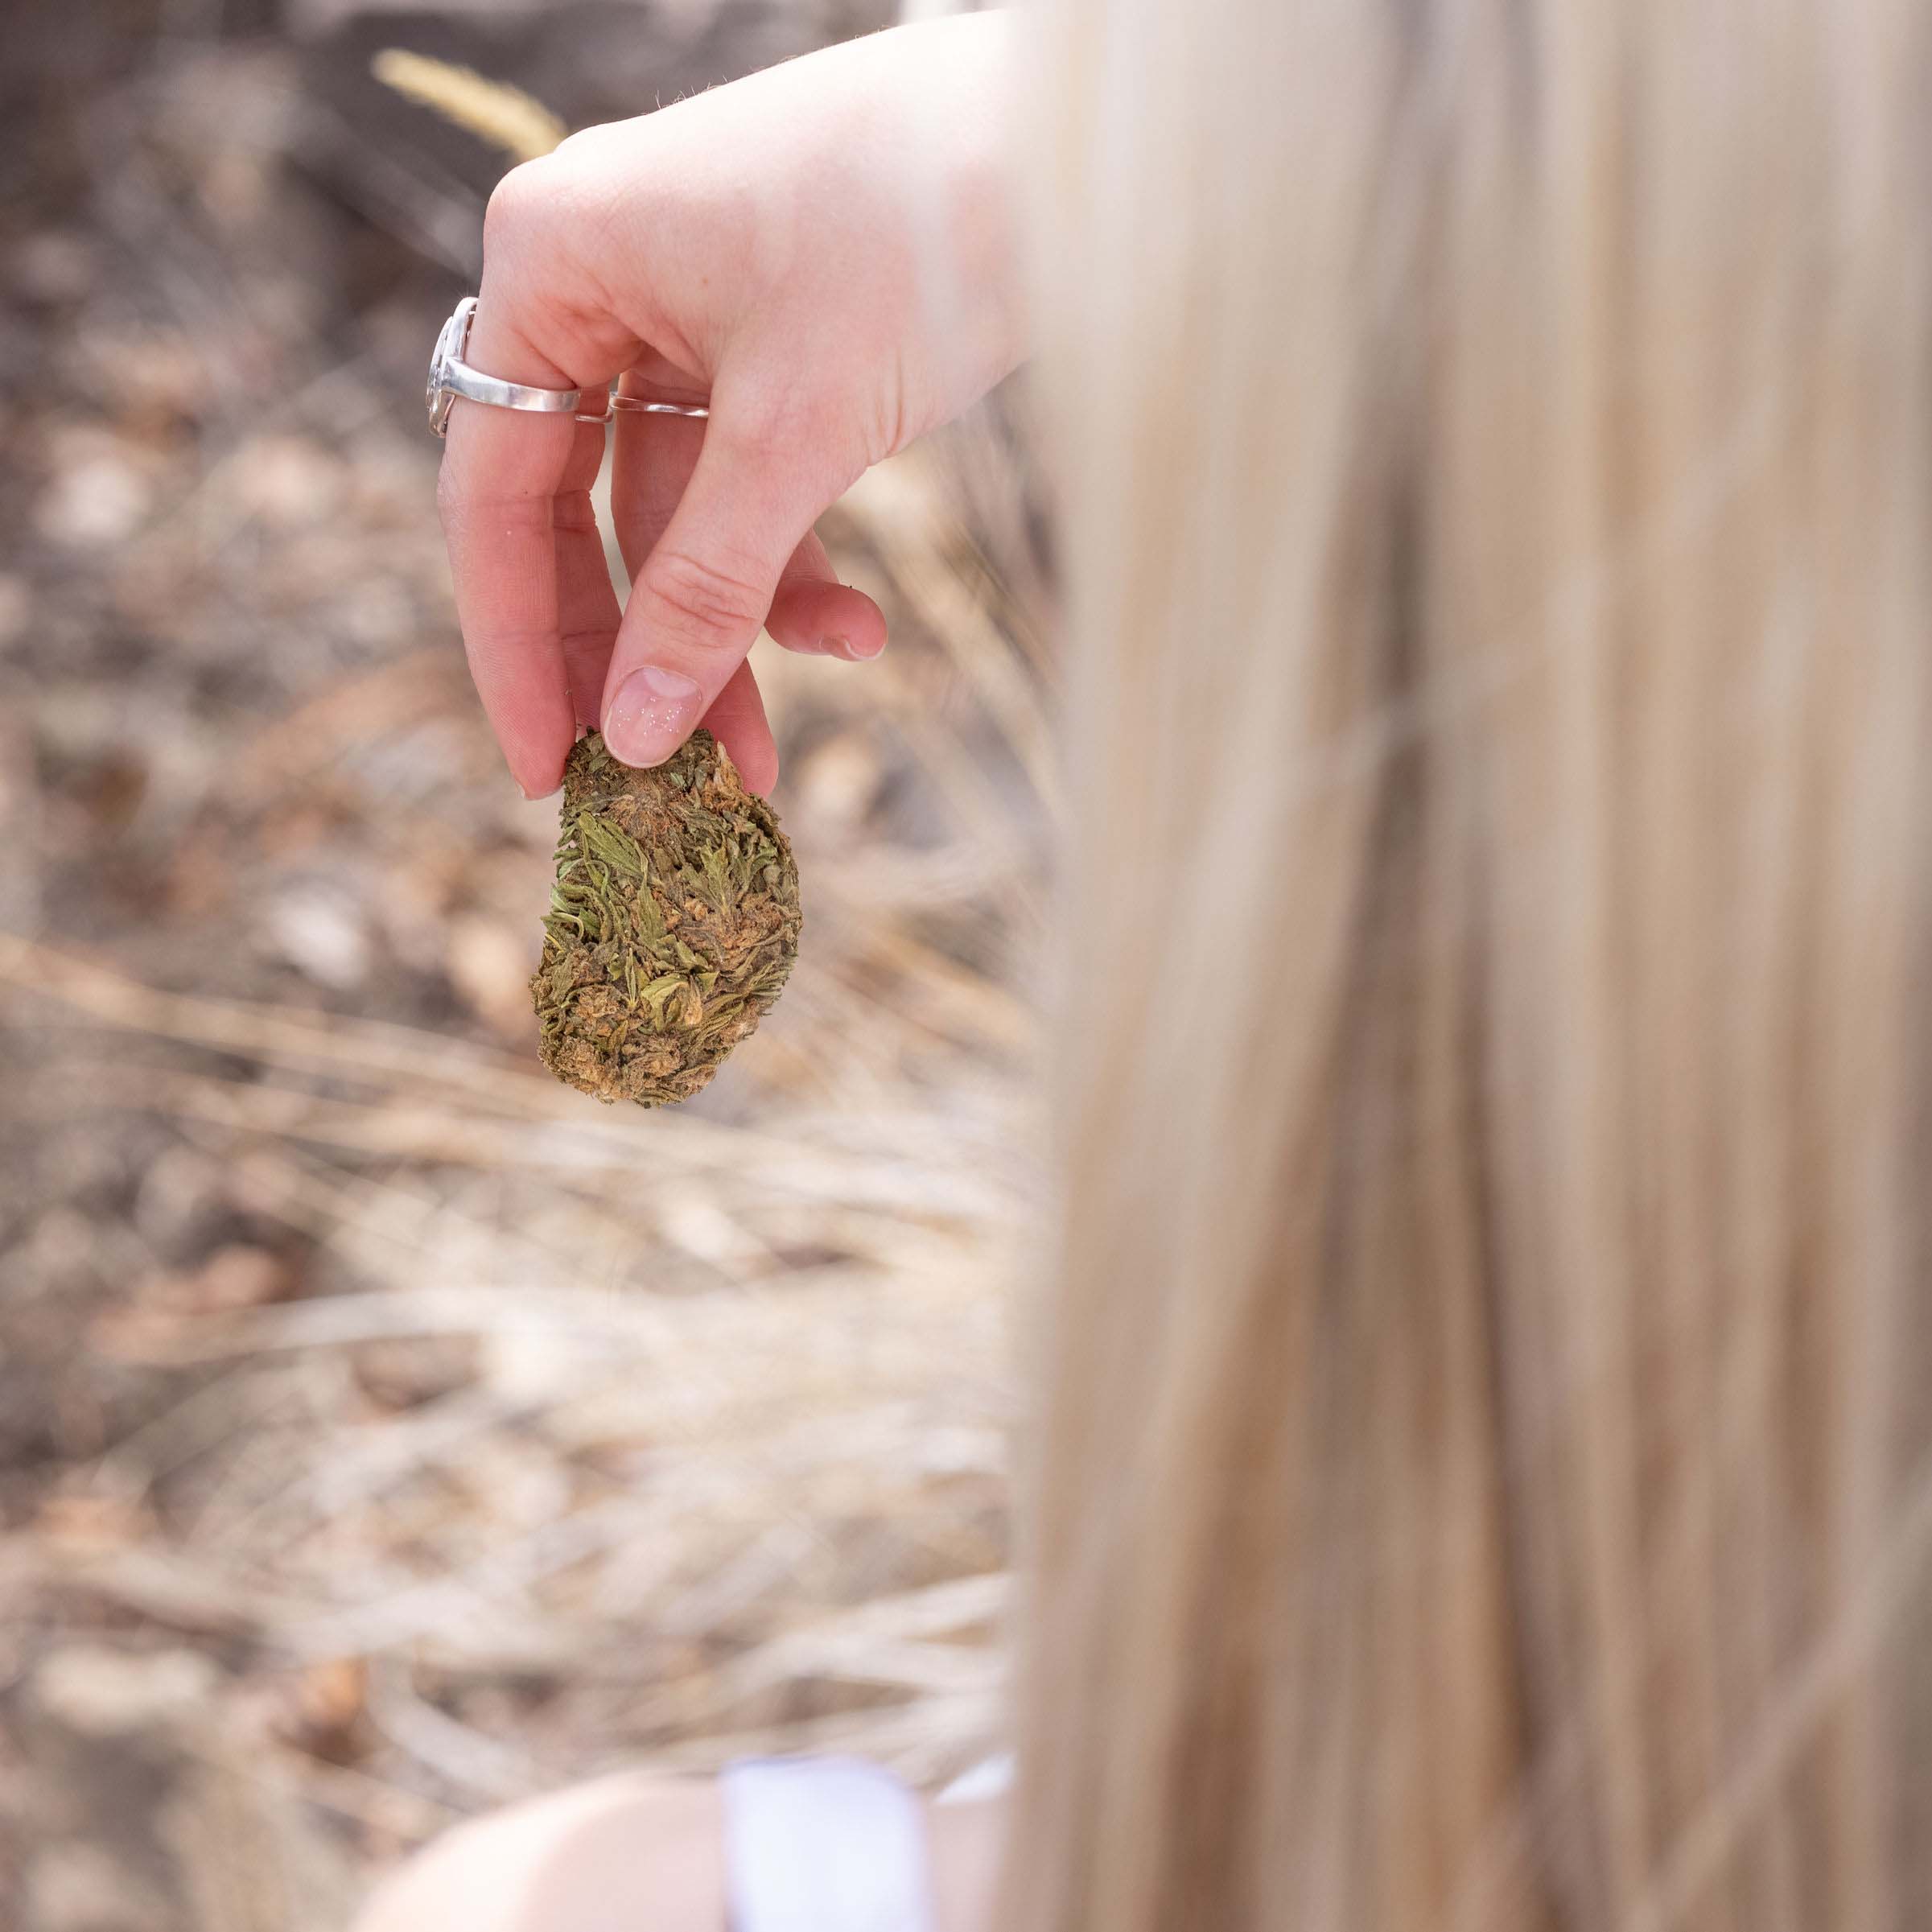 Blond woman holding a large CBD flower nug while sitting outside.